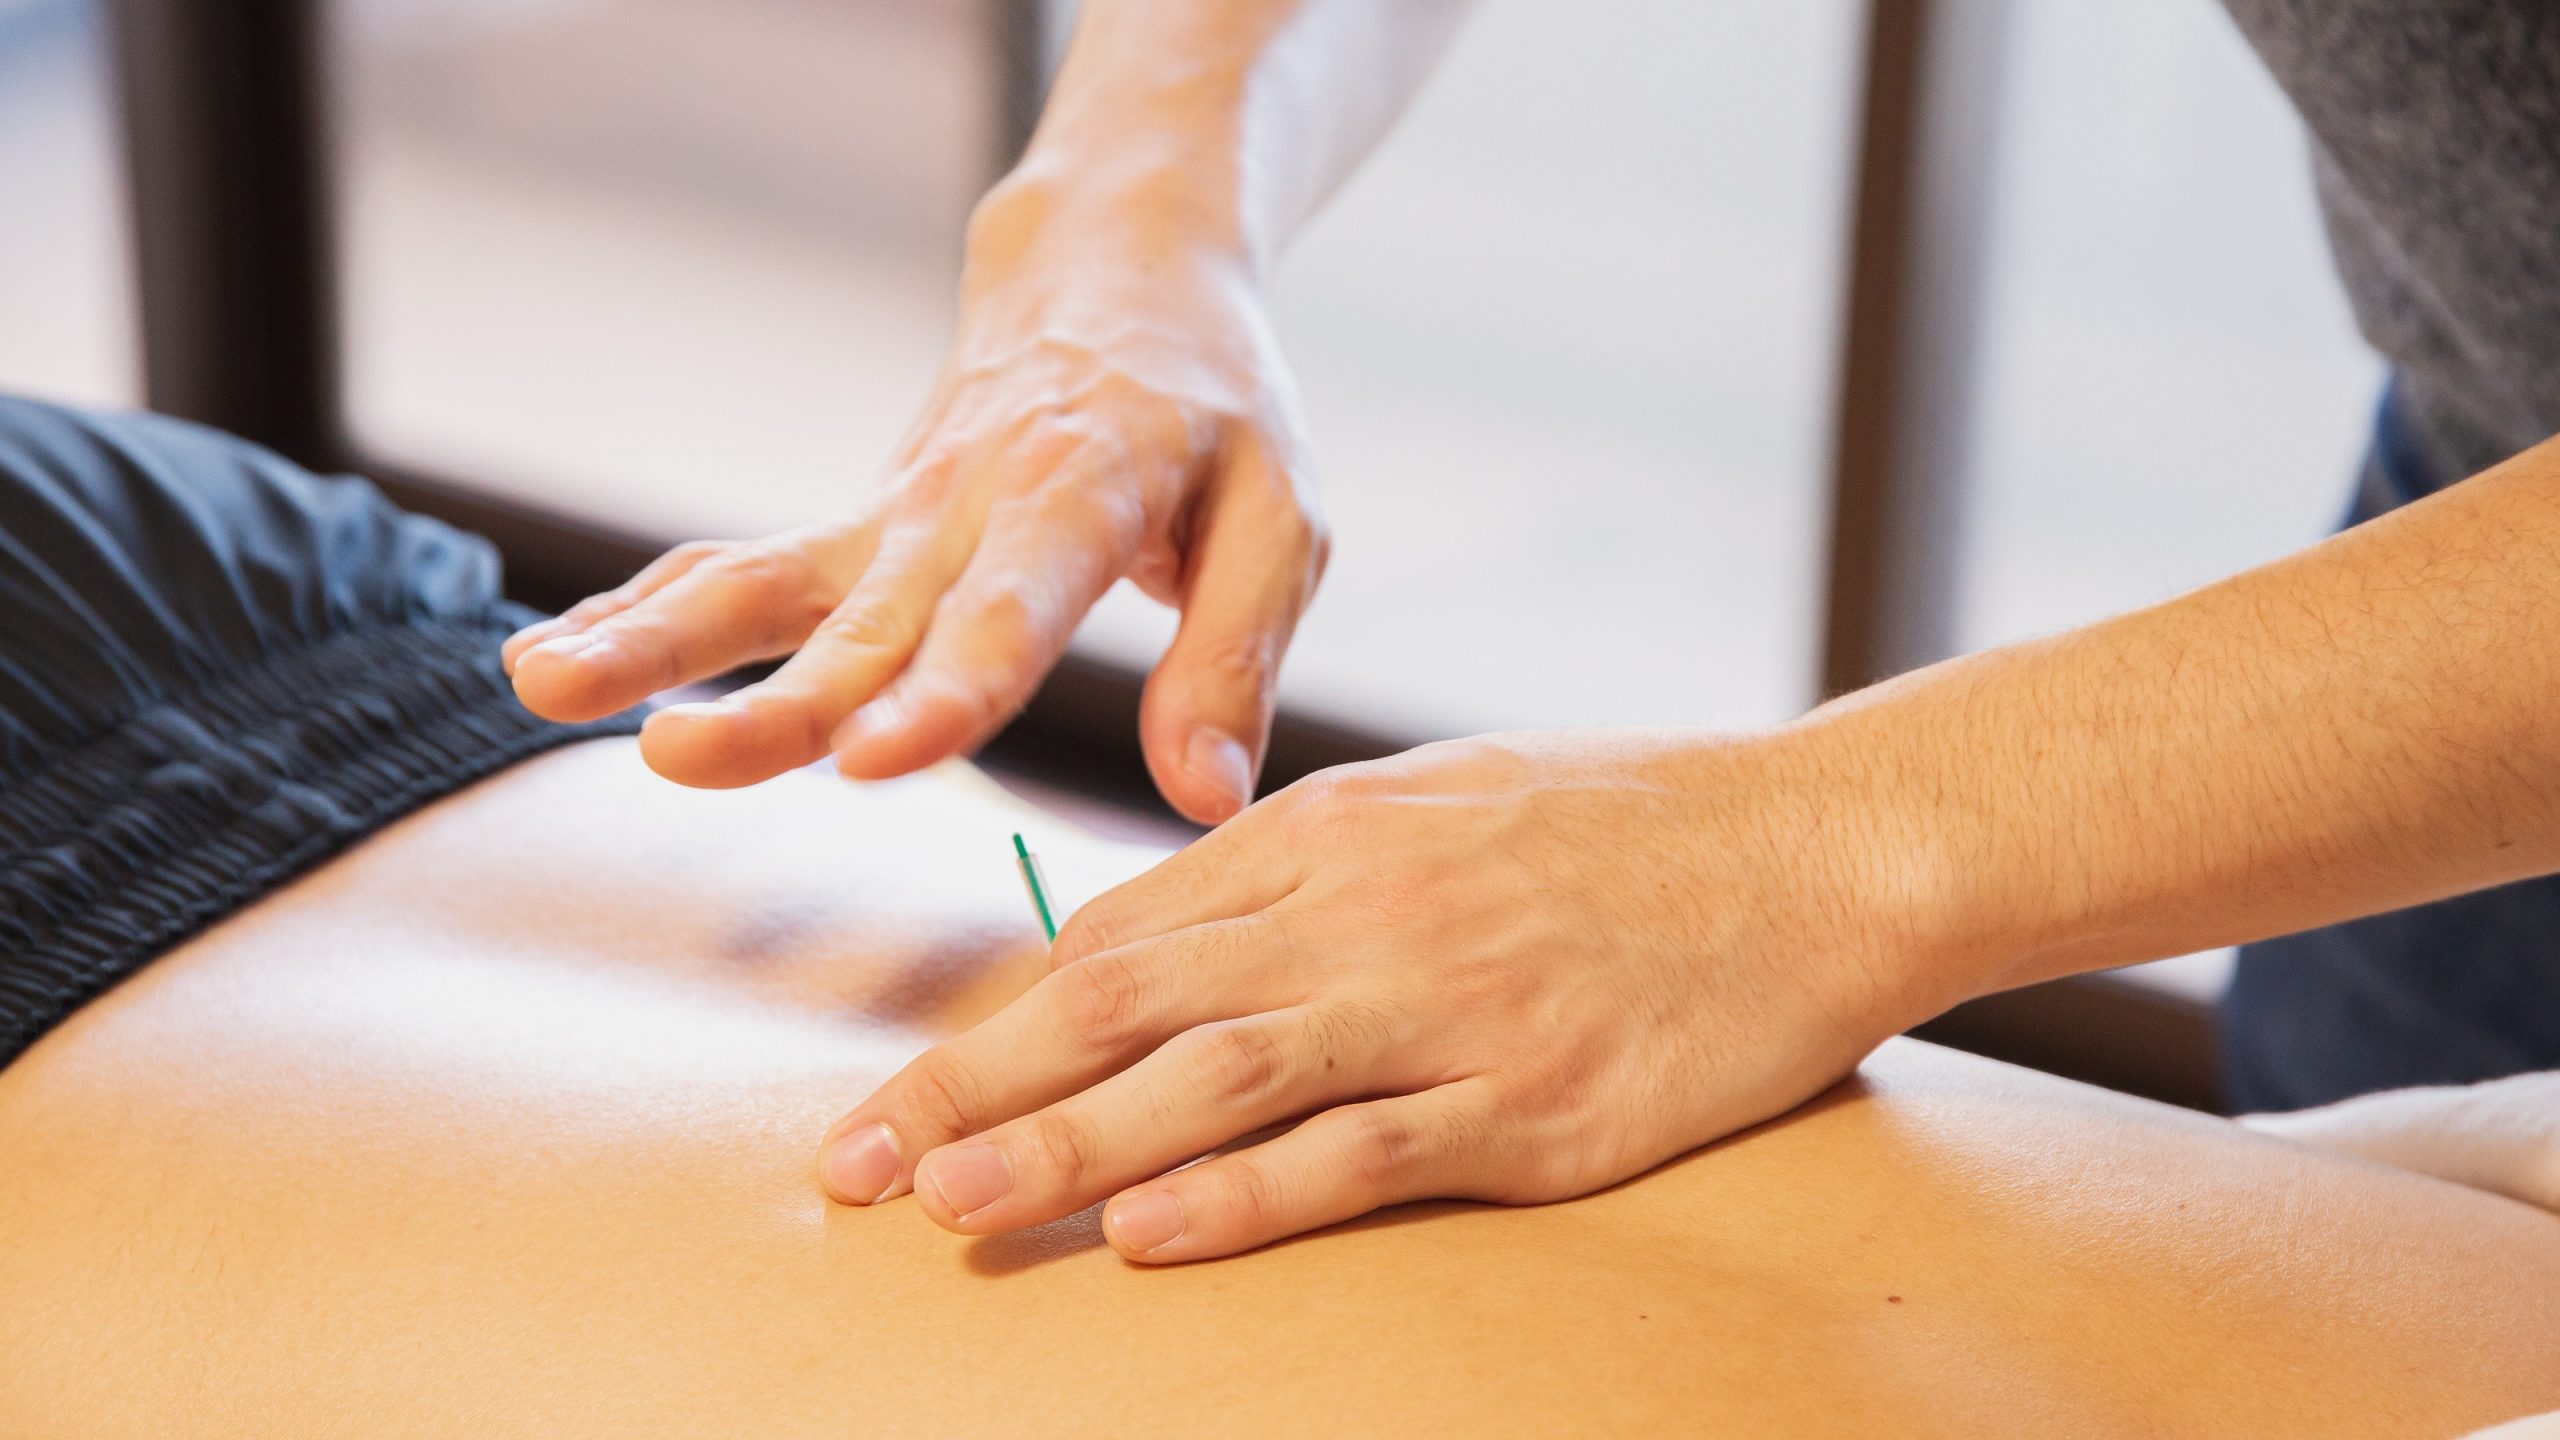 Acupuncture Needles on a Patient